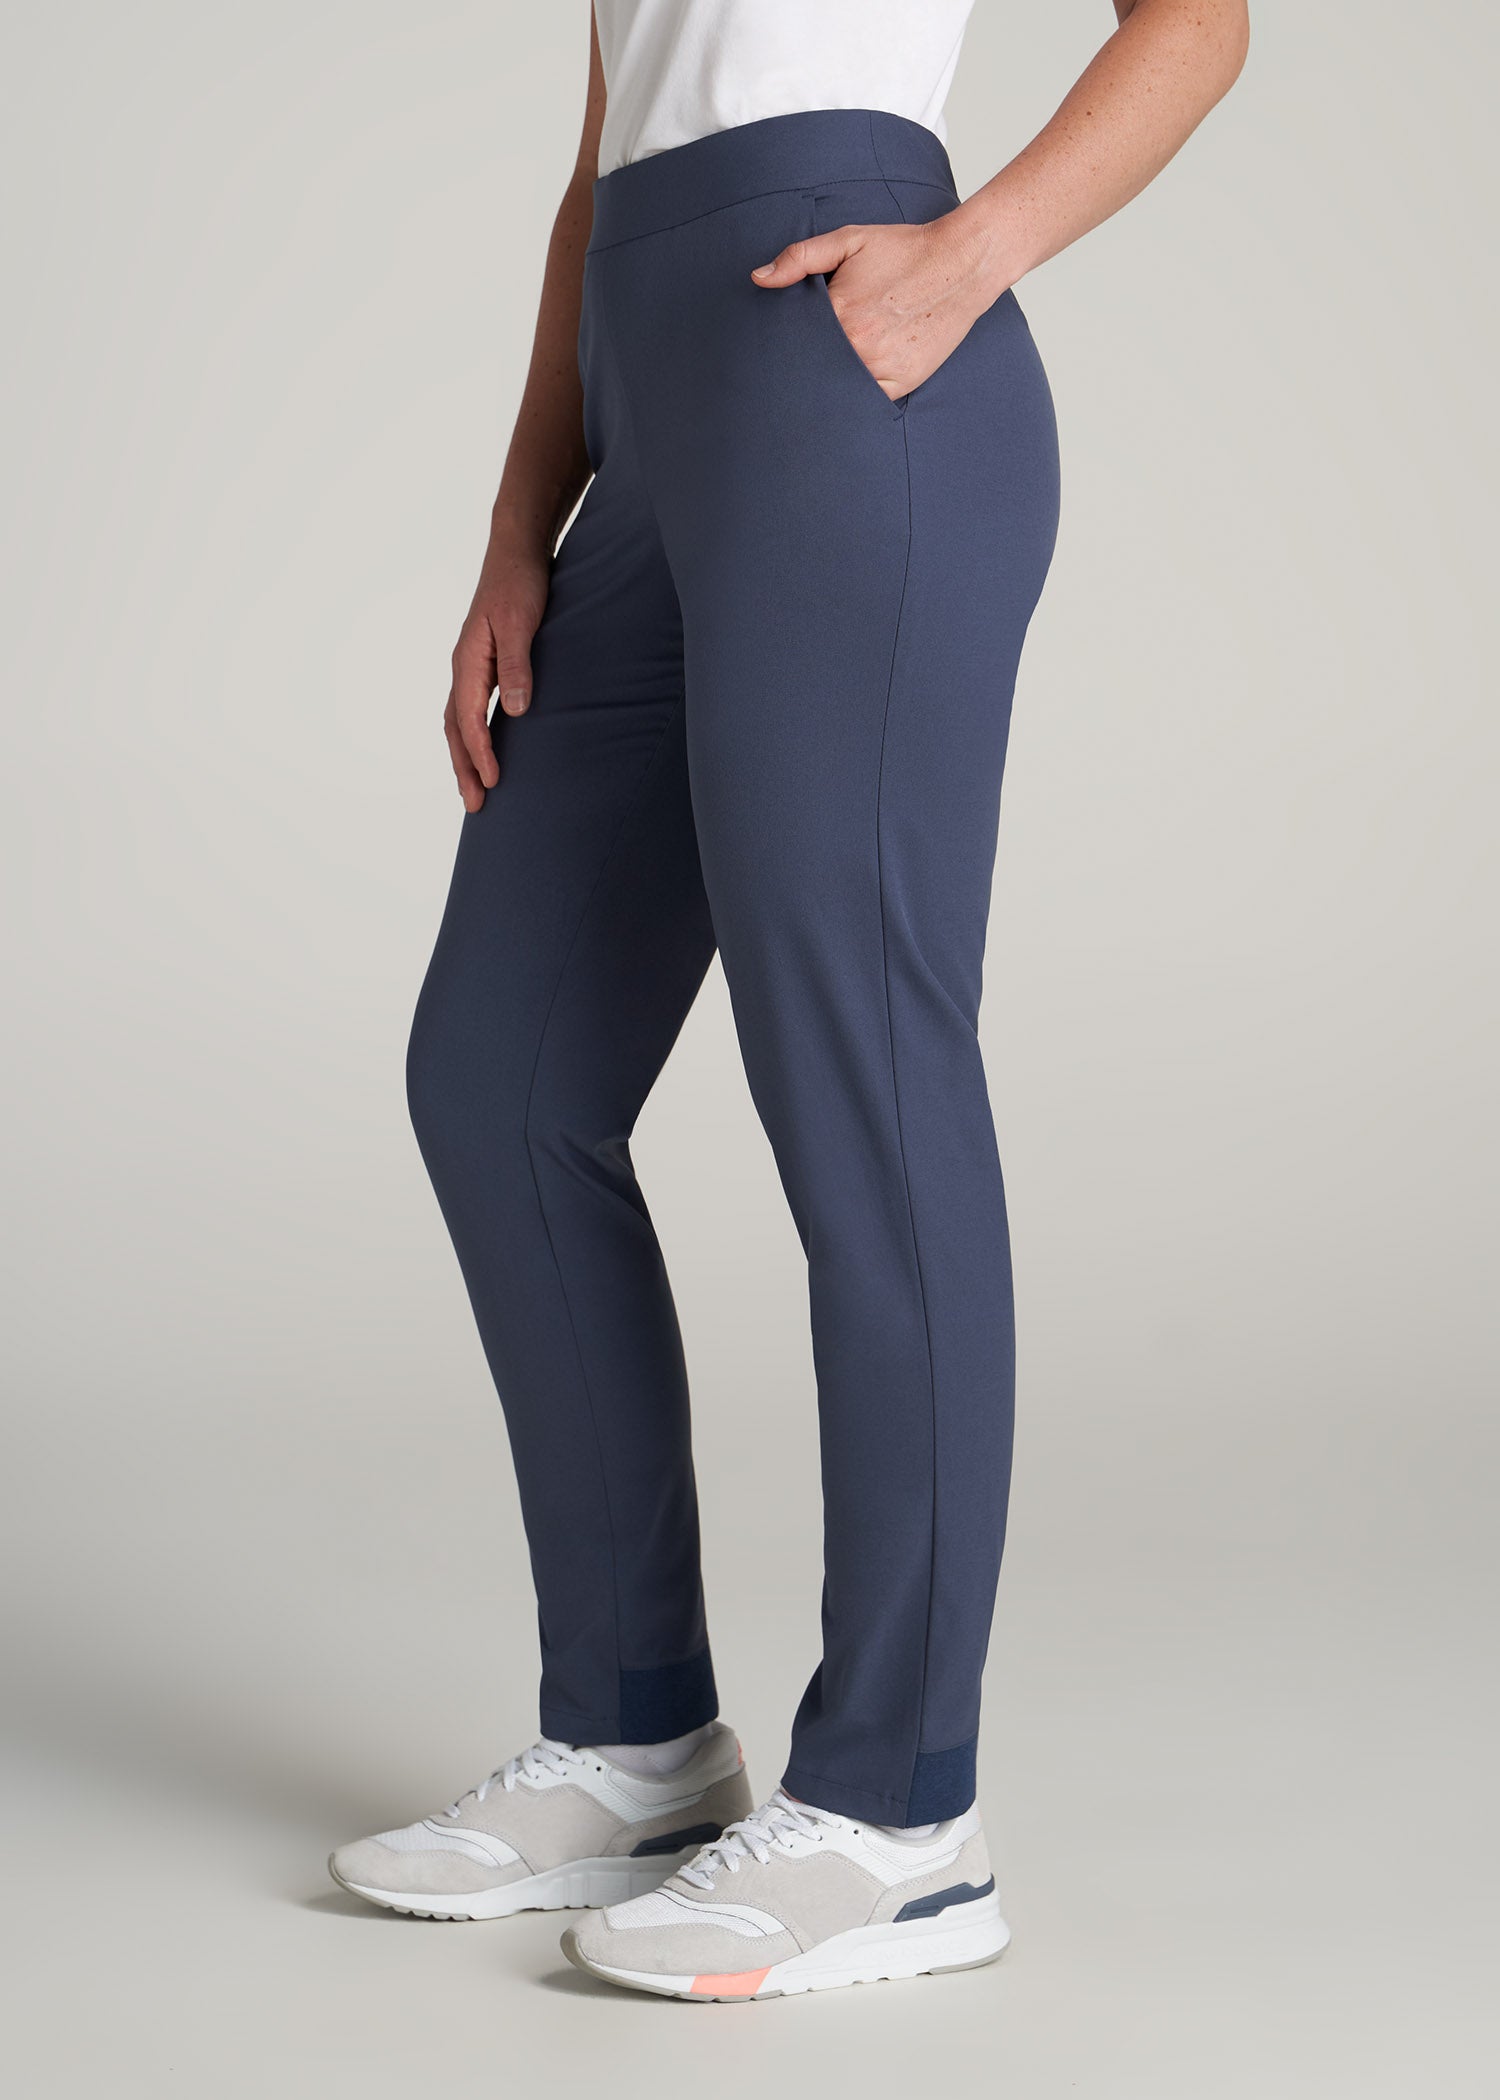    American-Tall-Women-Pull-on-Traveler-Pant-Smoky-Blue-side